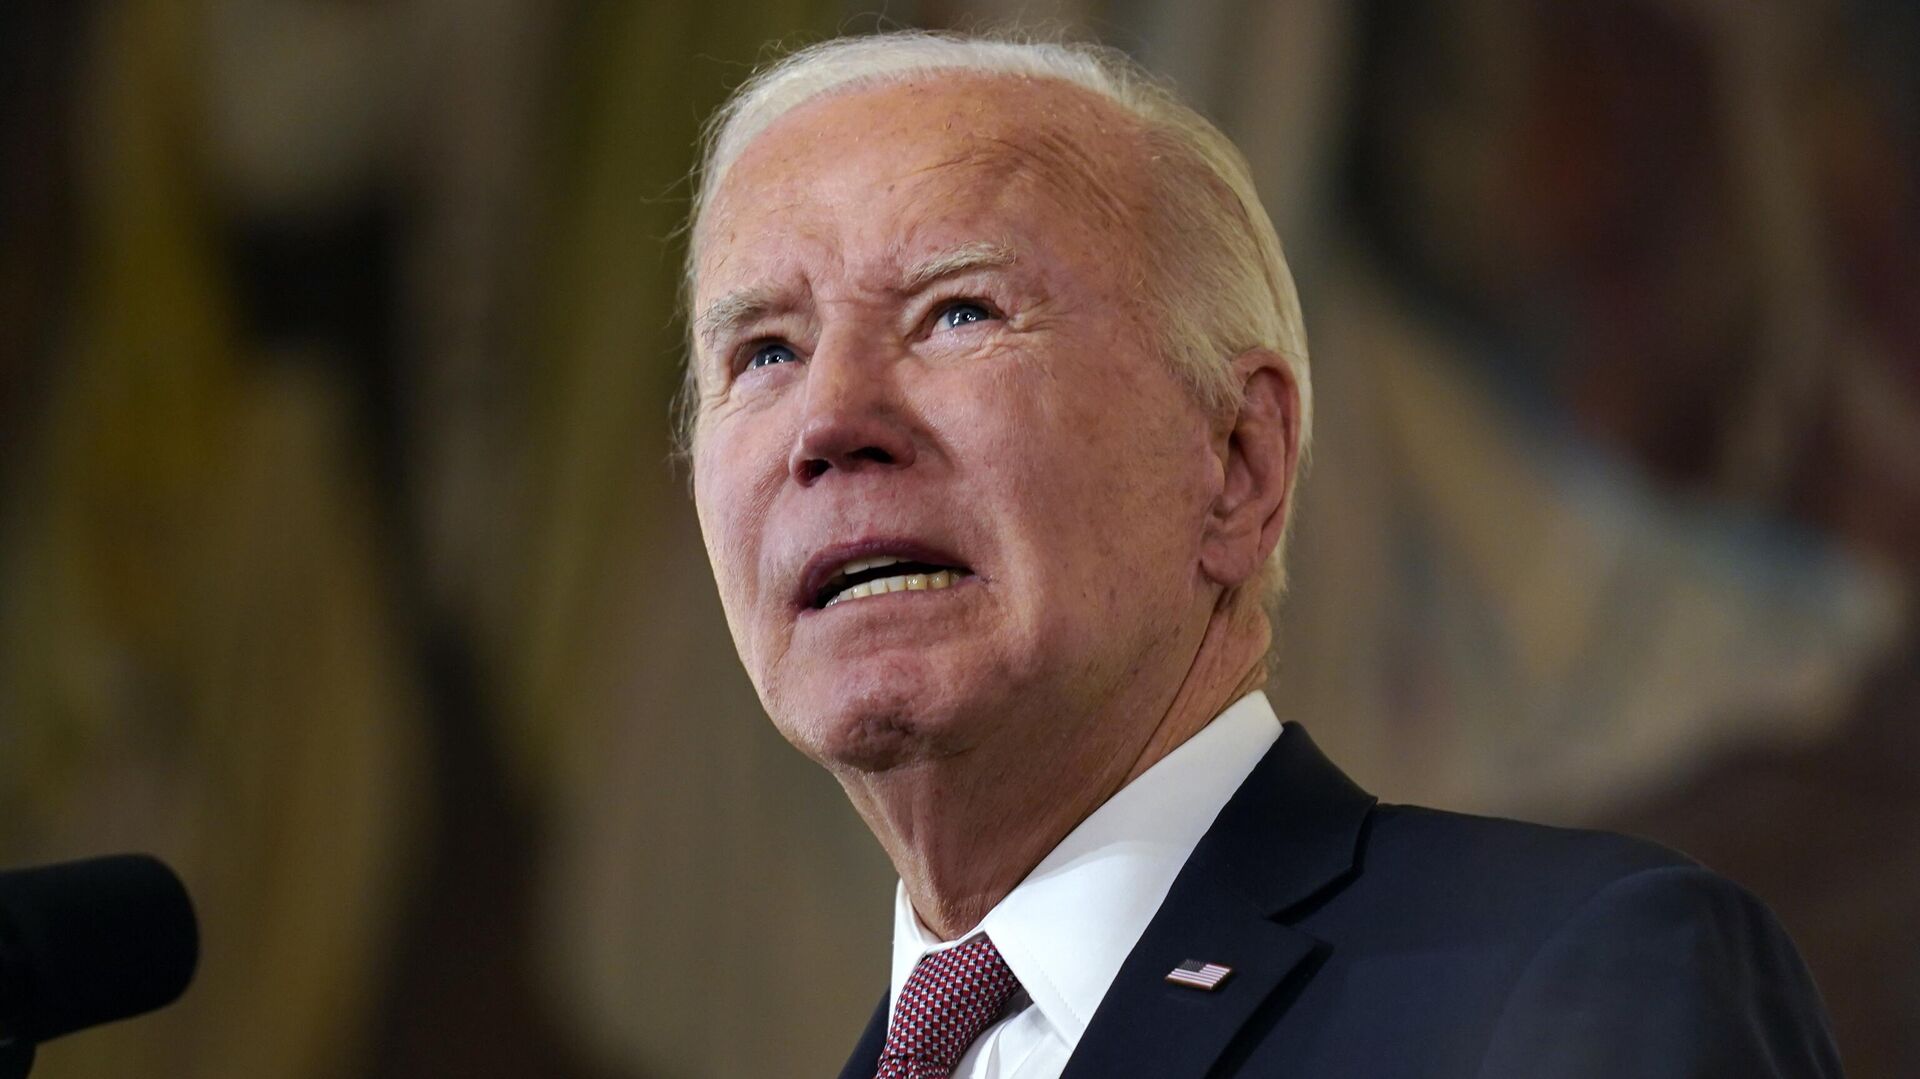 Doctors made a negative prediction about Biden’s health